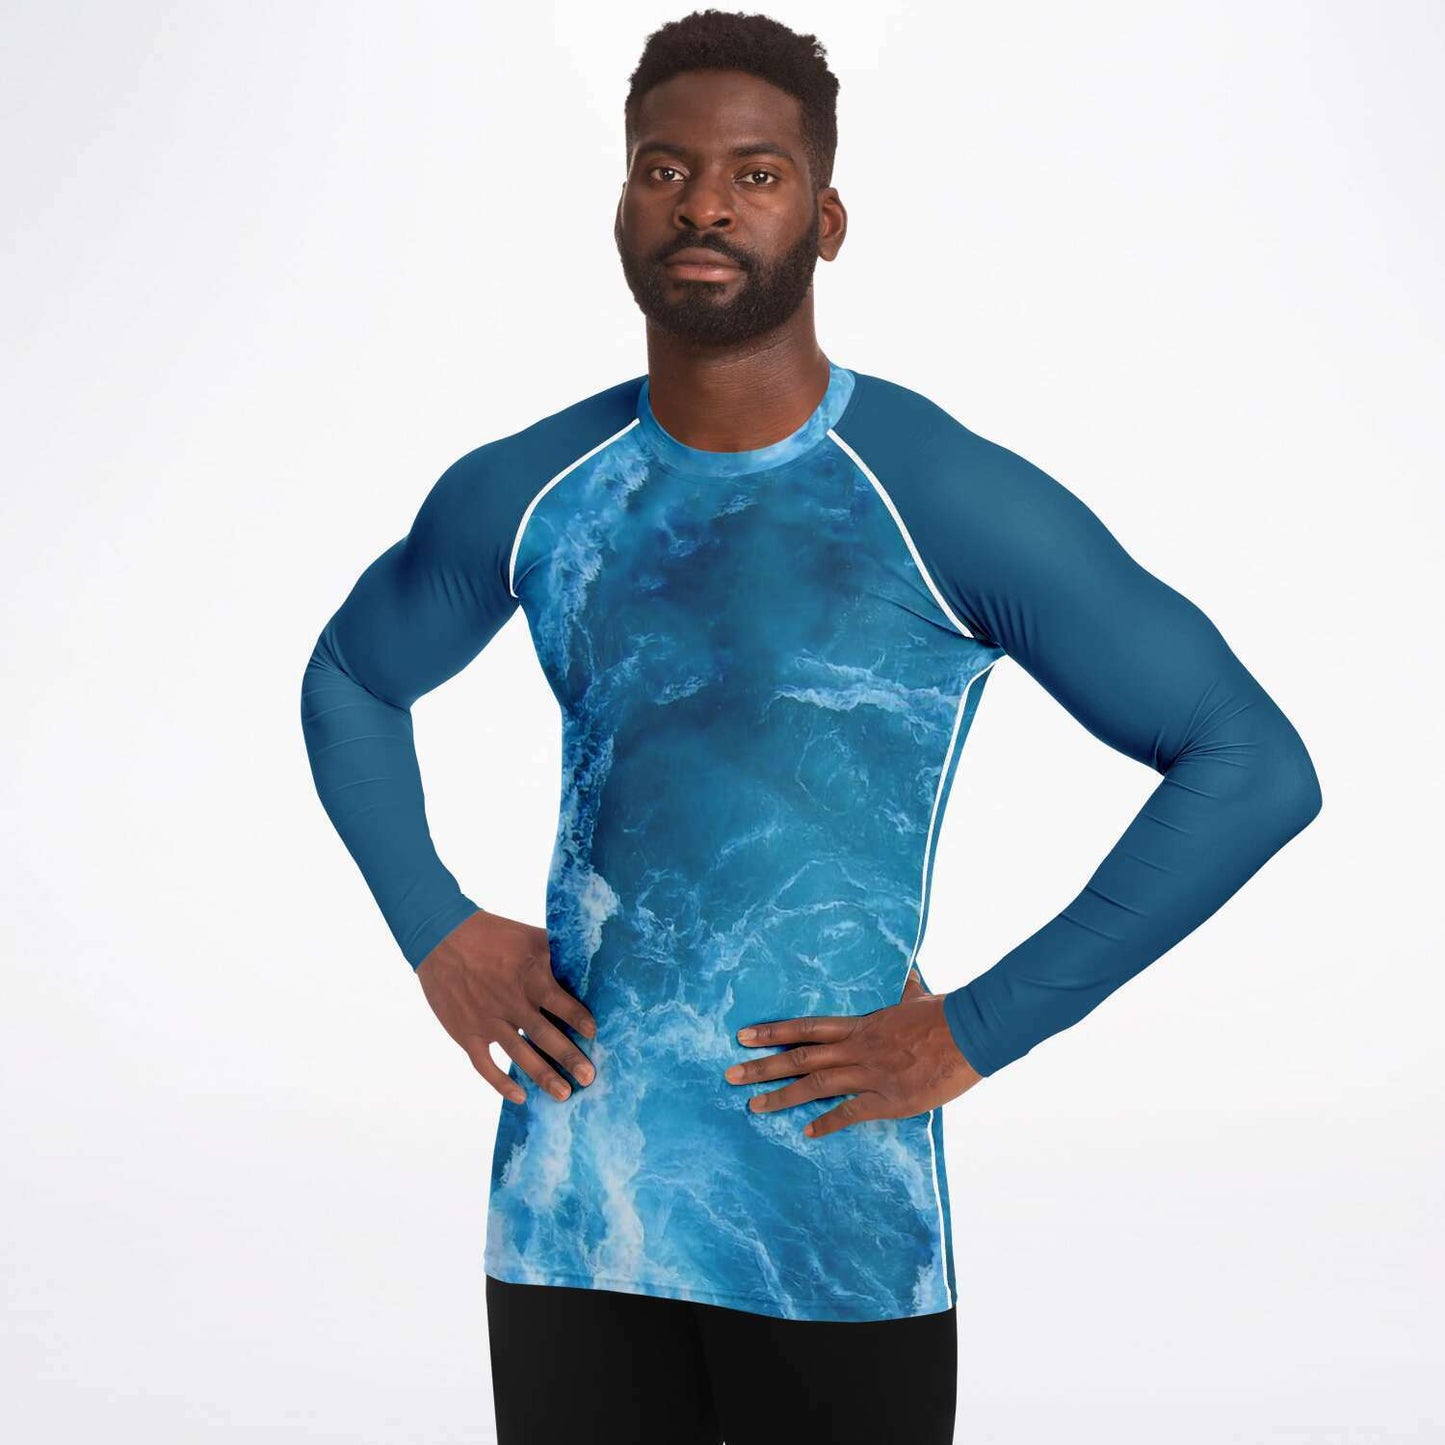 Male model wearing scuba diving rash guard with ocean design on front and back and blue sleeves